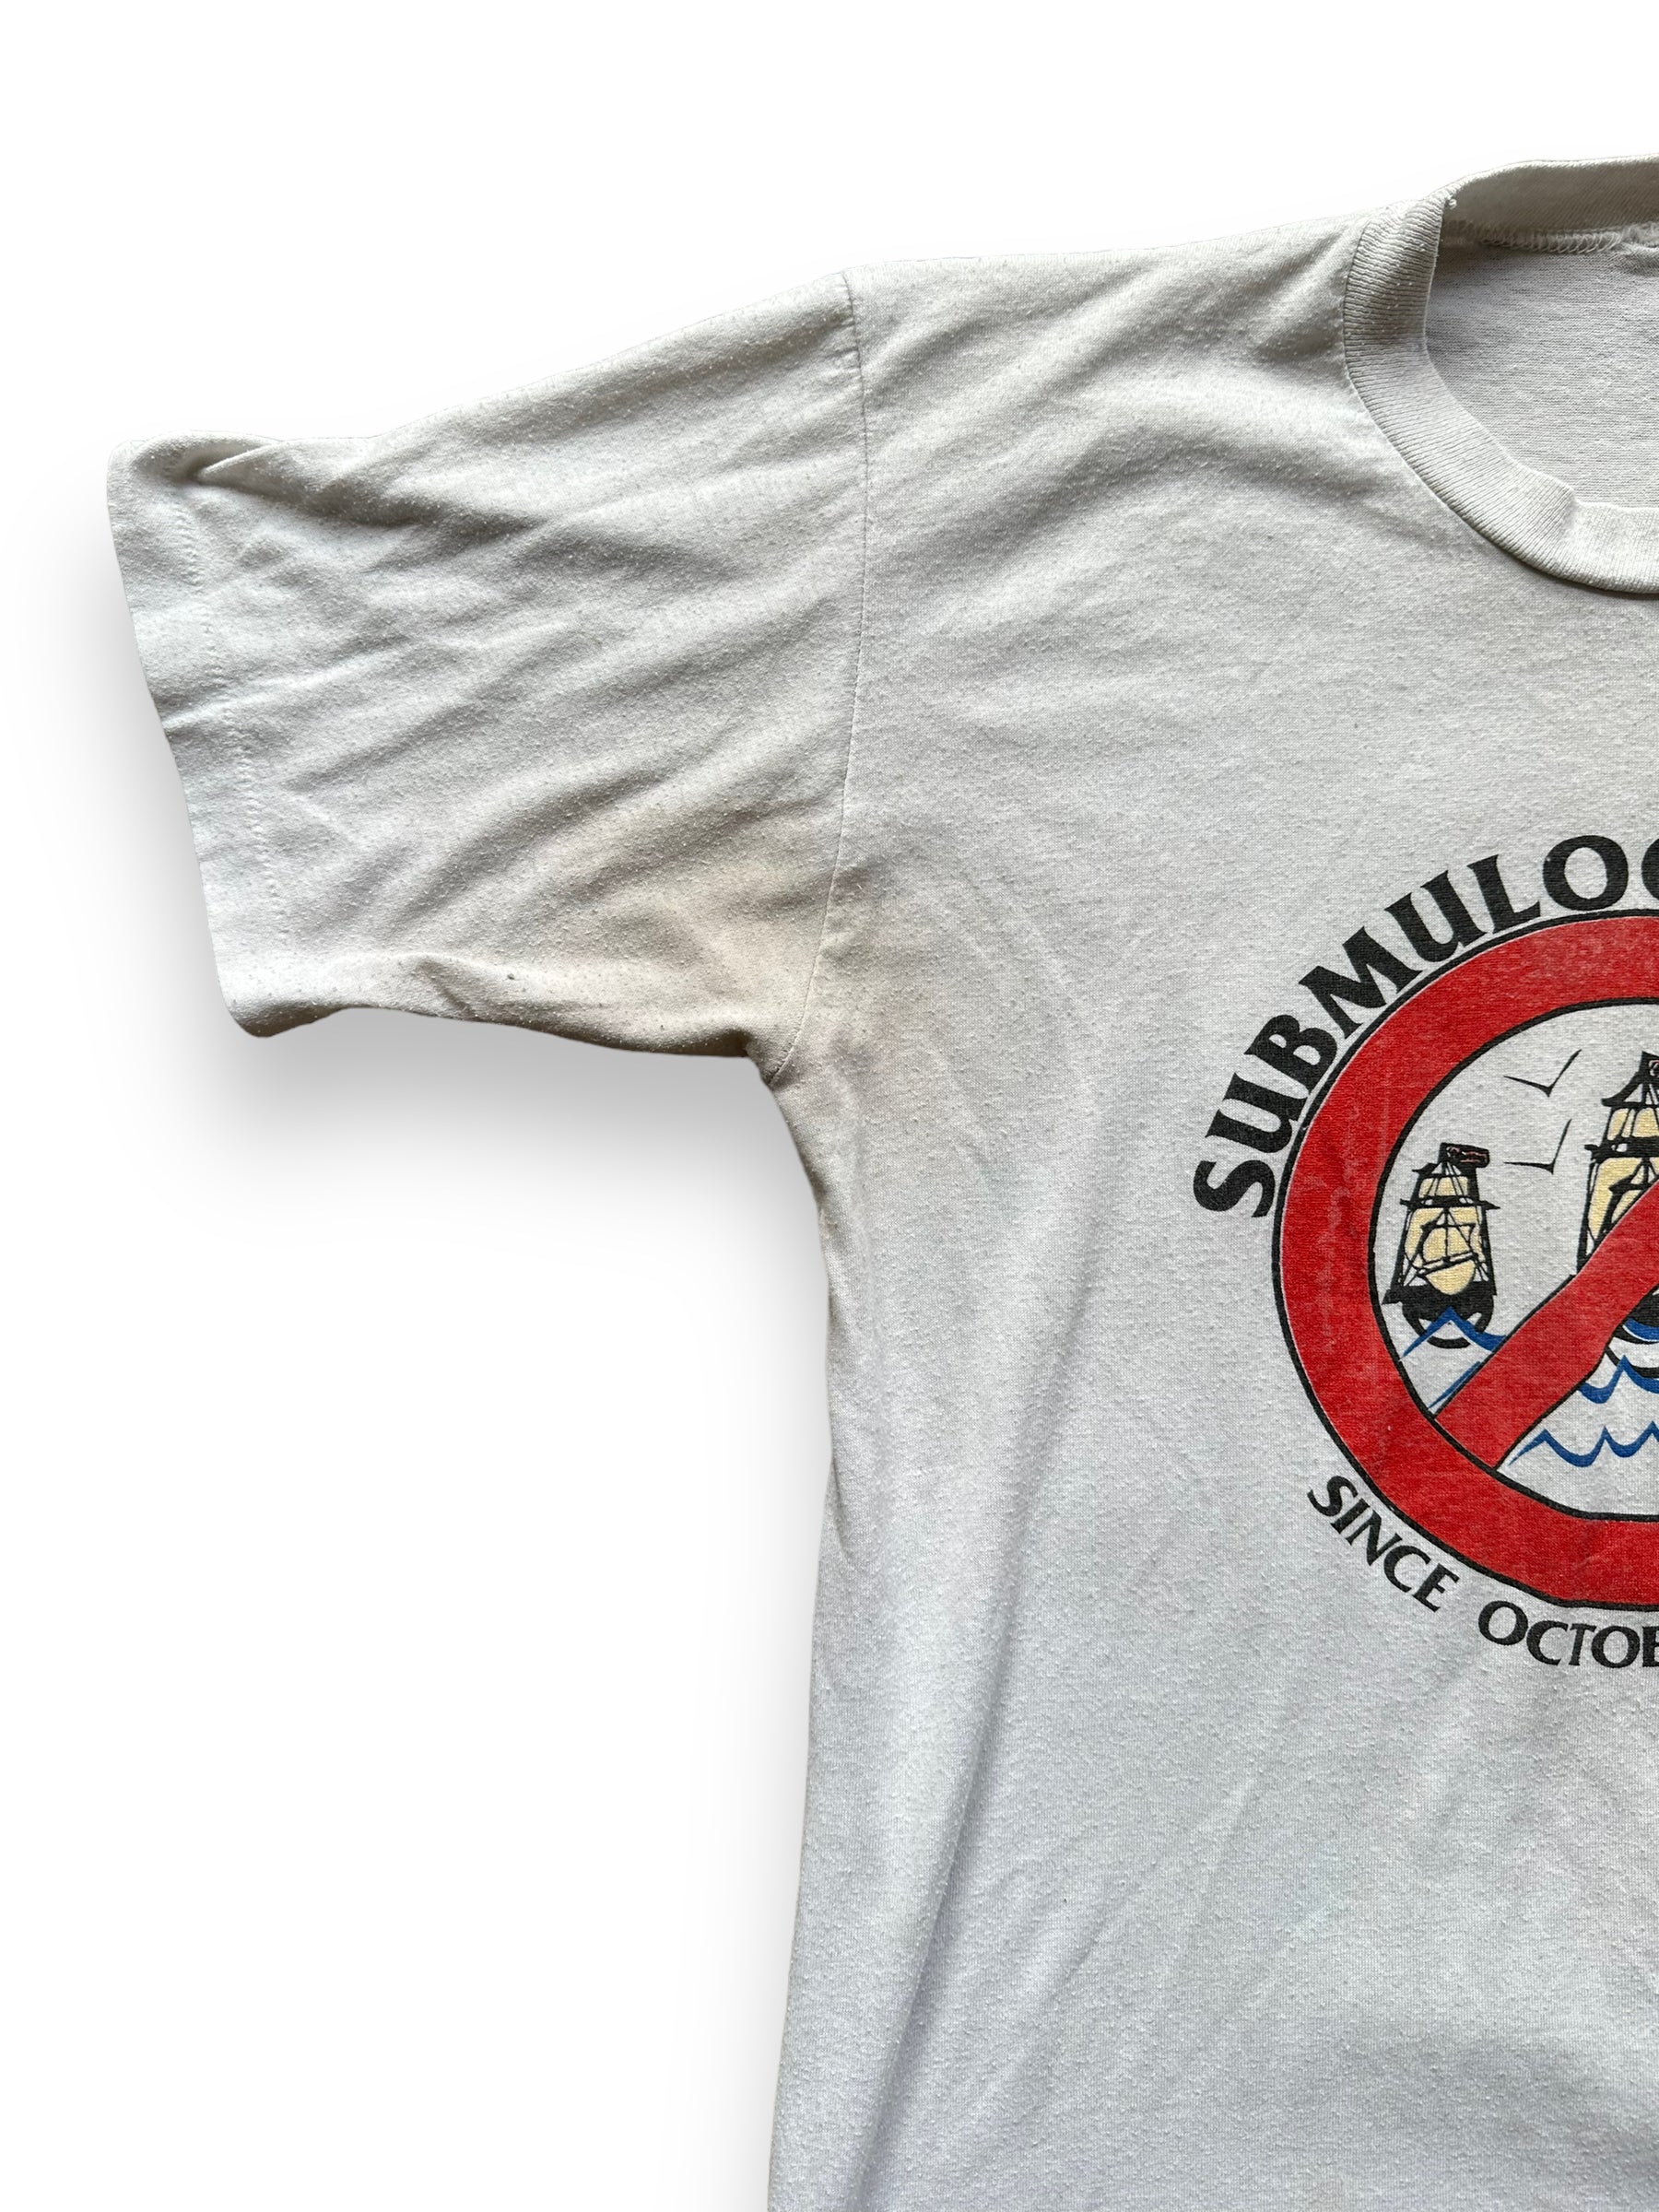 Slight Pitting on Right Pit of Vintage Submuloc First Nations Anti-Columbus Tee SZ M | Vintage Graphic T-Shirts Seattle | Barn Owl Vintage Tees Seattle